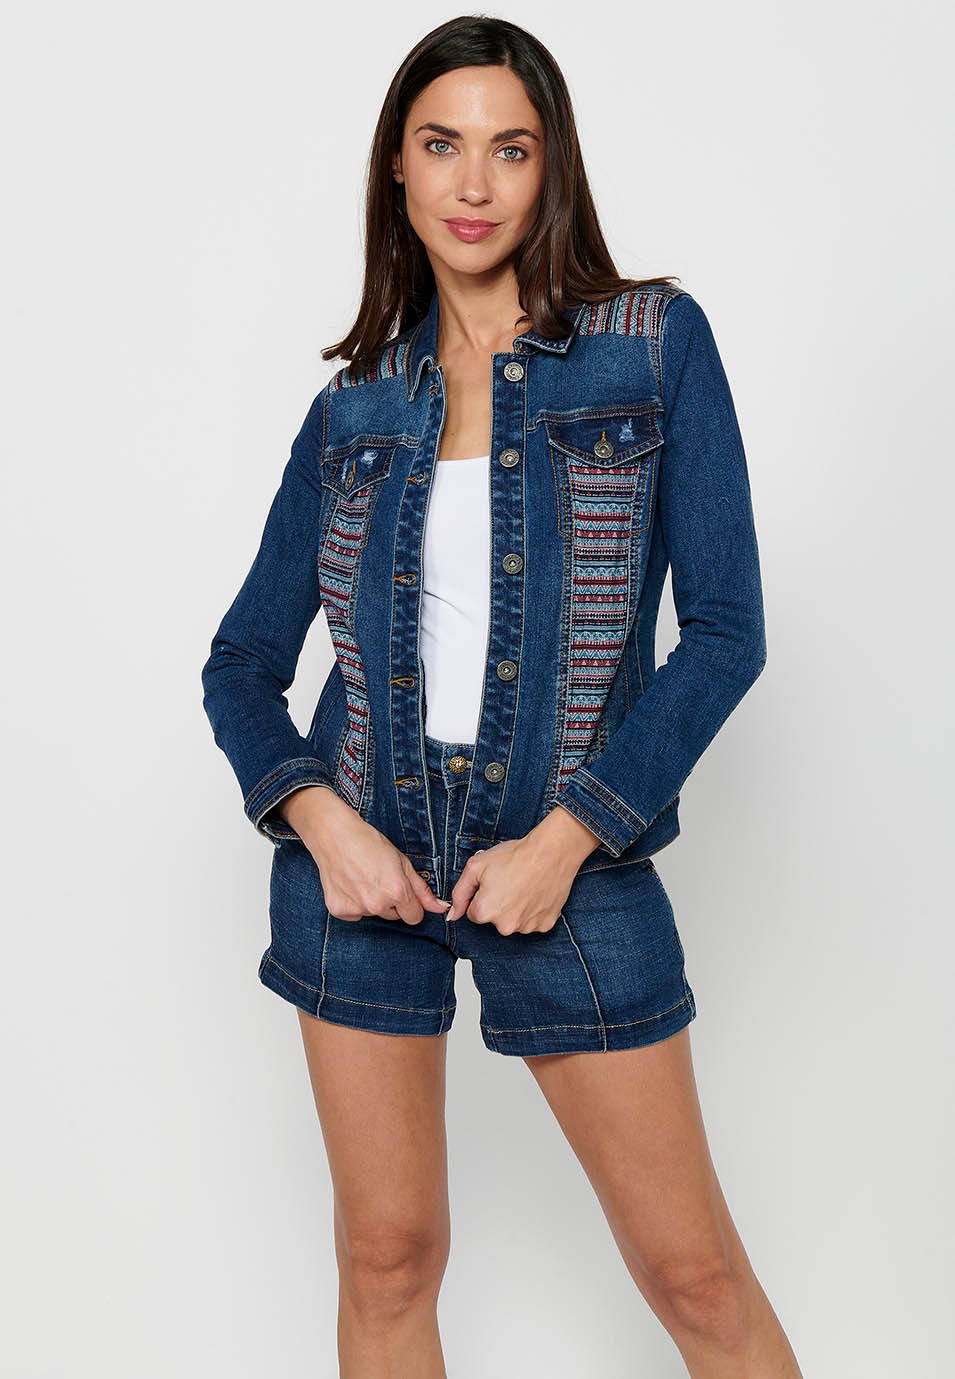 Long-sleeved denim jacket with ethnic fabric detail and front closure with blue buttons for women 9